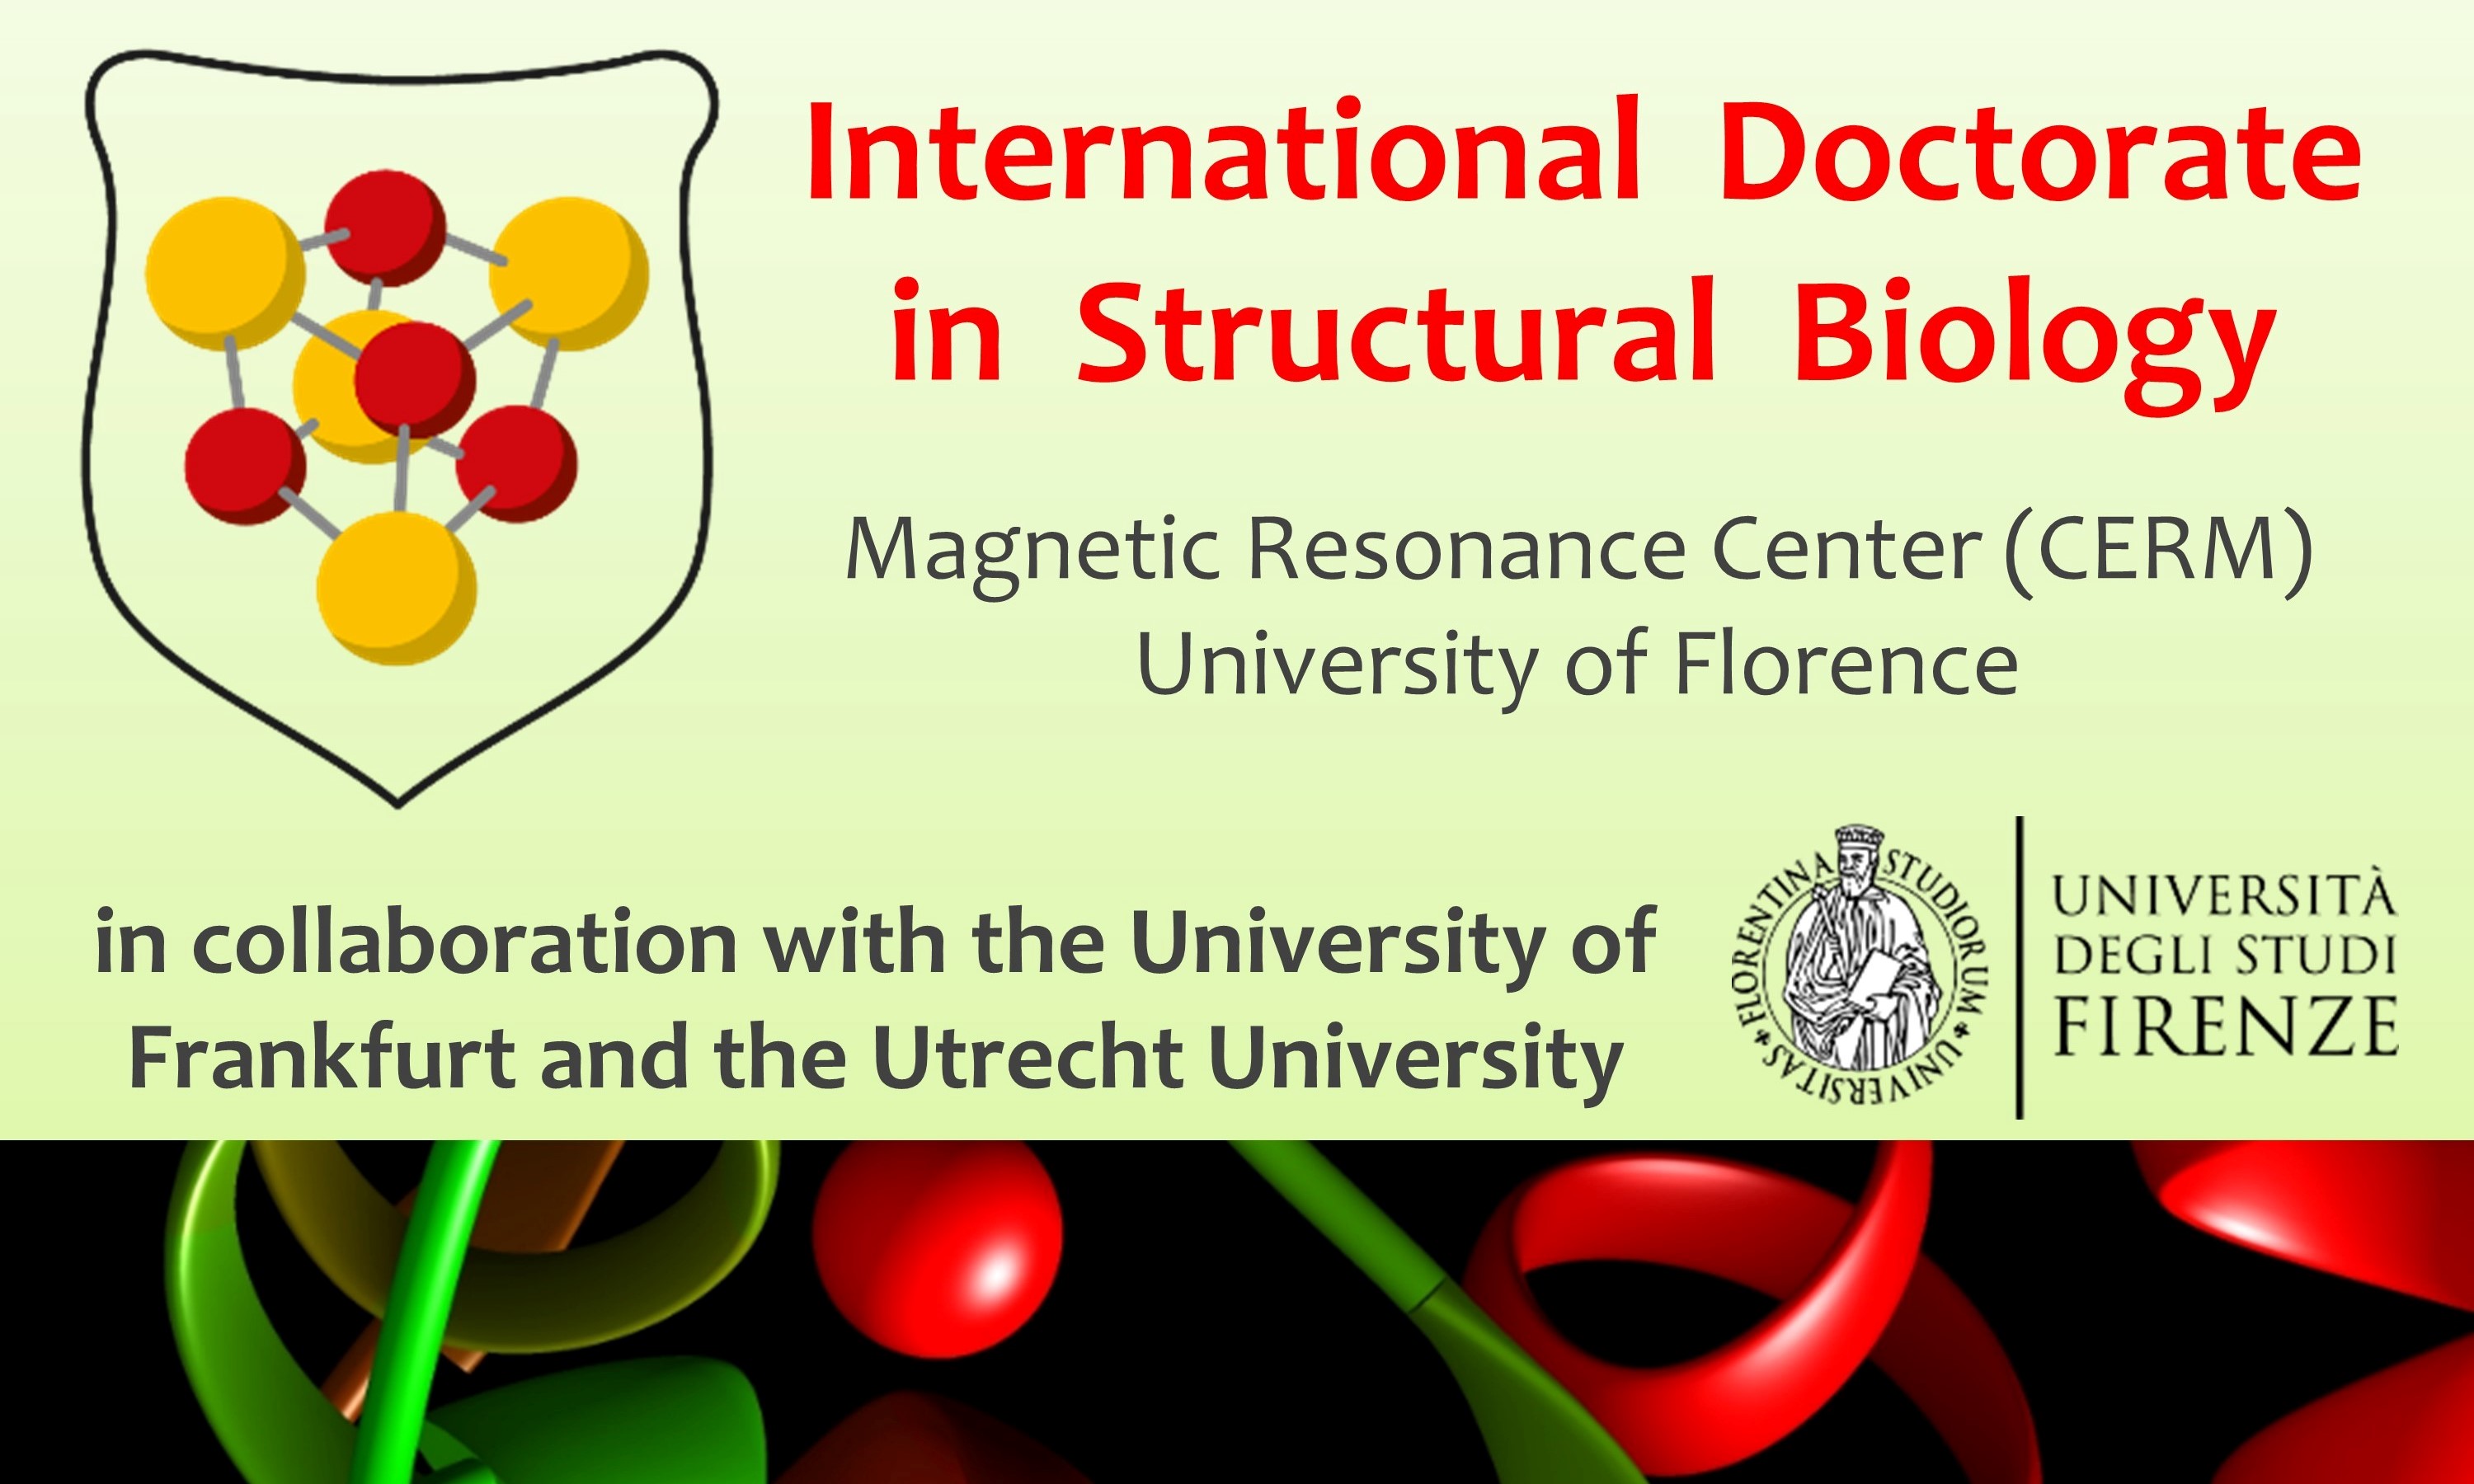 International Doctorate in Structural Biology